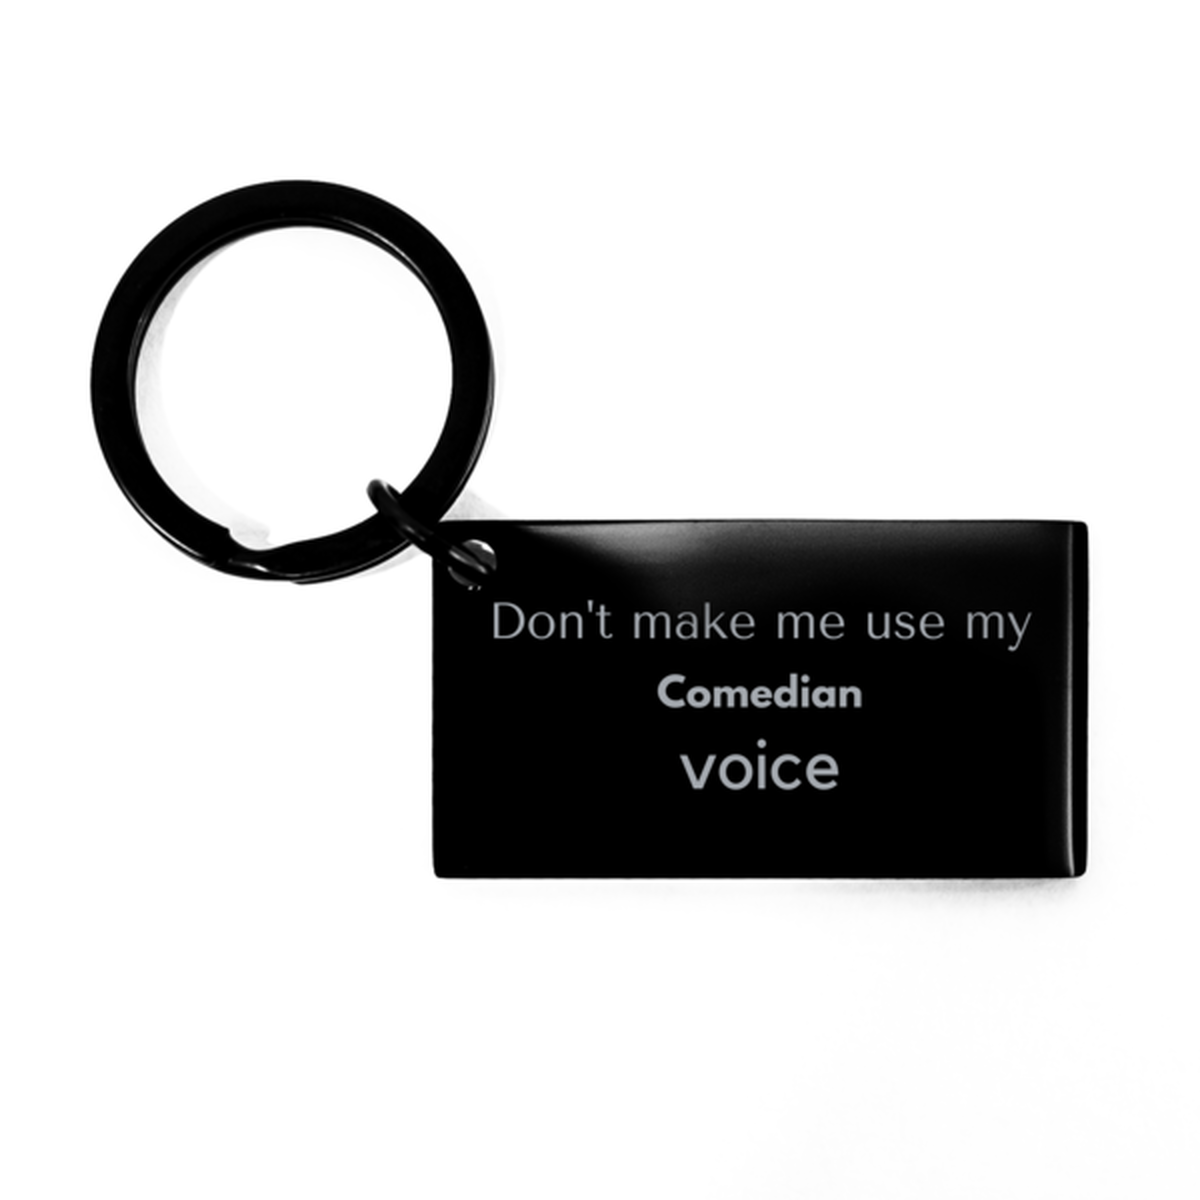 Don't make me use my Comedian voice, Sarcasm Comedian Gifts, Christmas Comedian Keychain Birthday Unique Gifts For Comedian Coworkers, Men, Women, Colleague, Friends